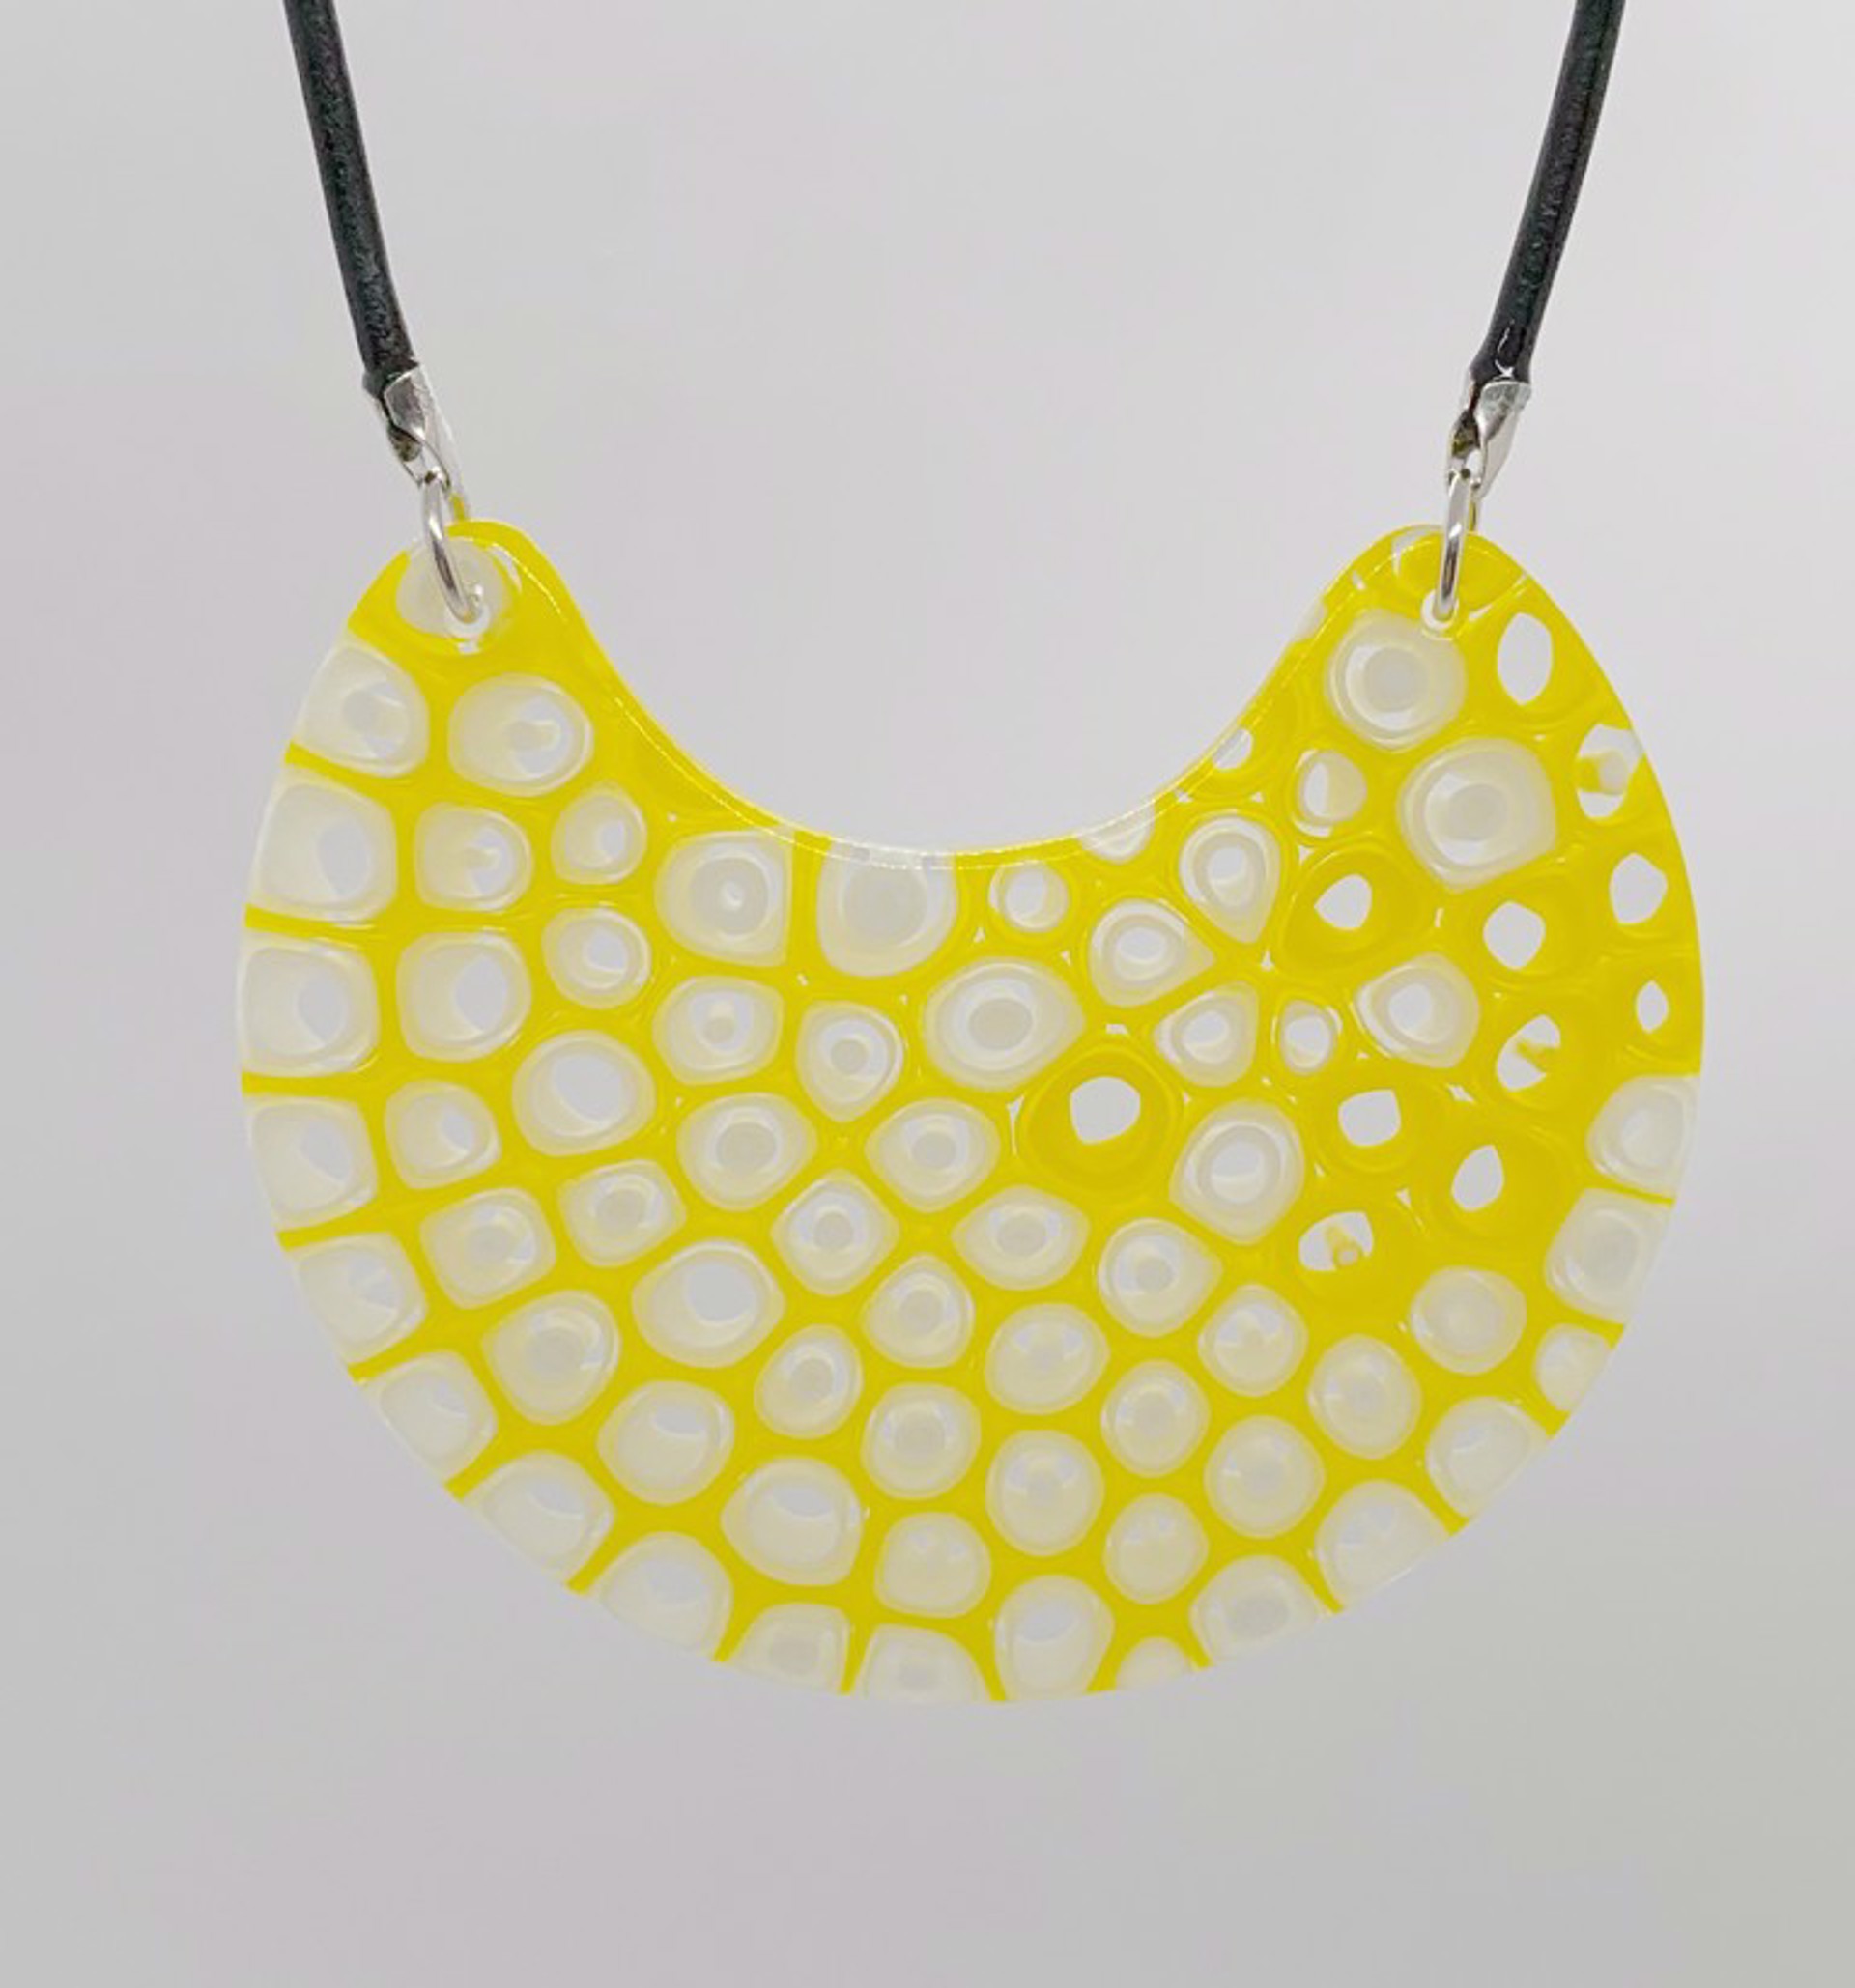 Murrini Glossy Missing Bite Necklace by Chris Cox